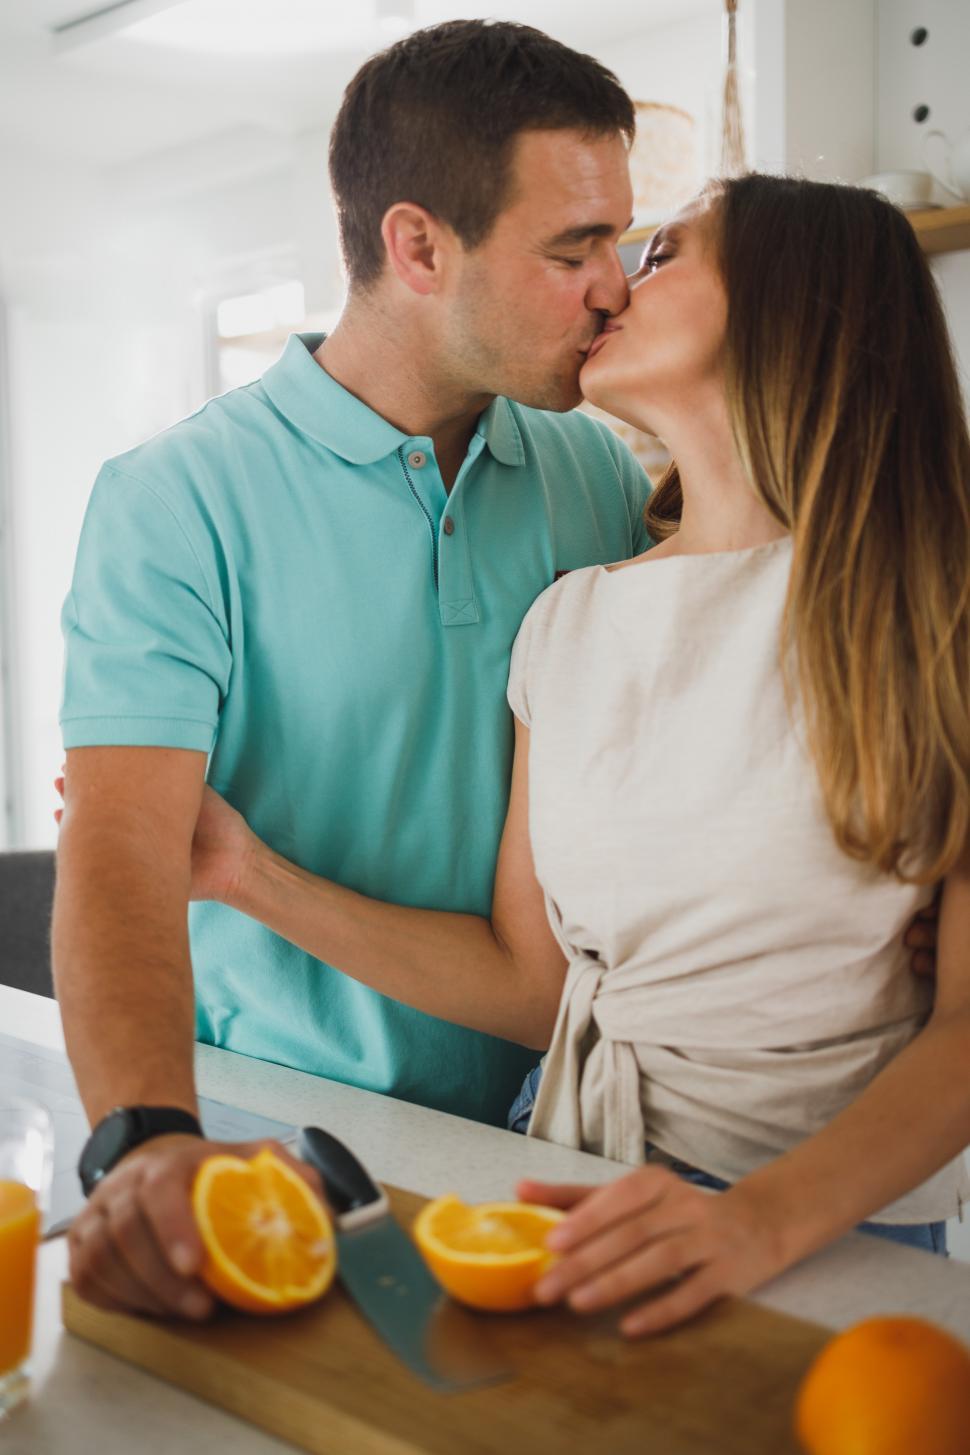 Free Image of Couple kissing in the kitchen 